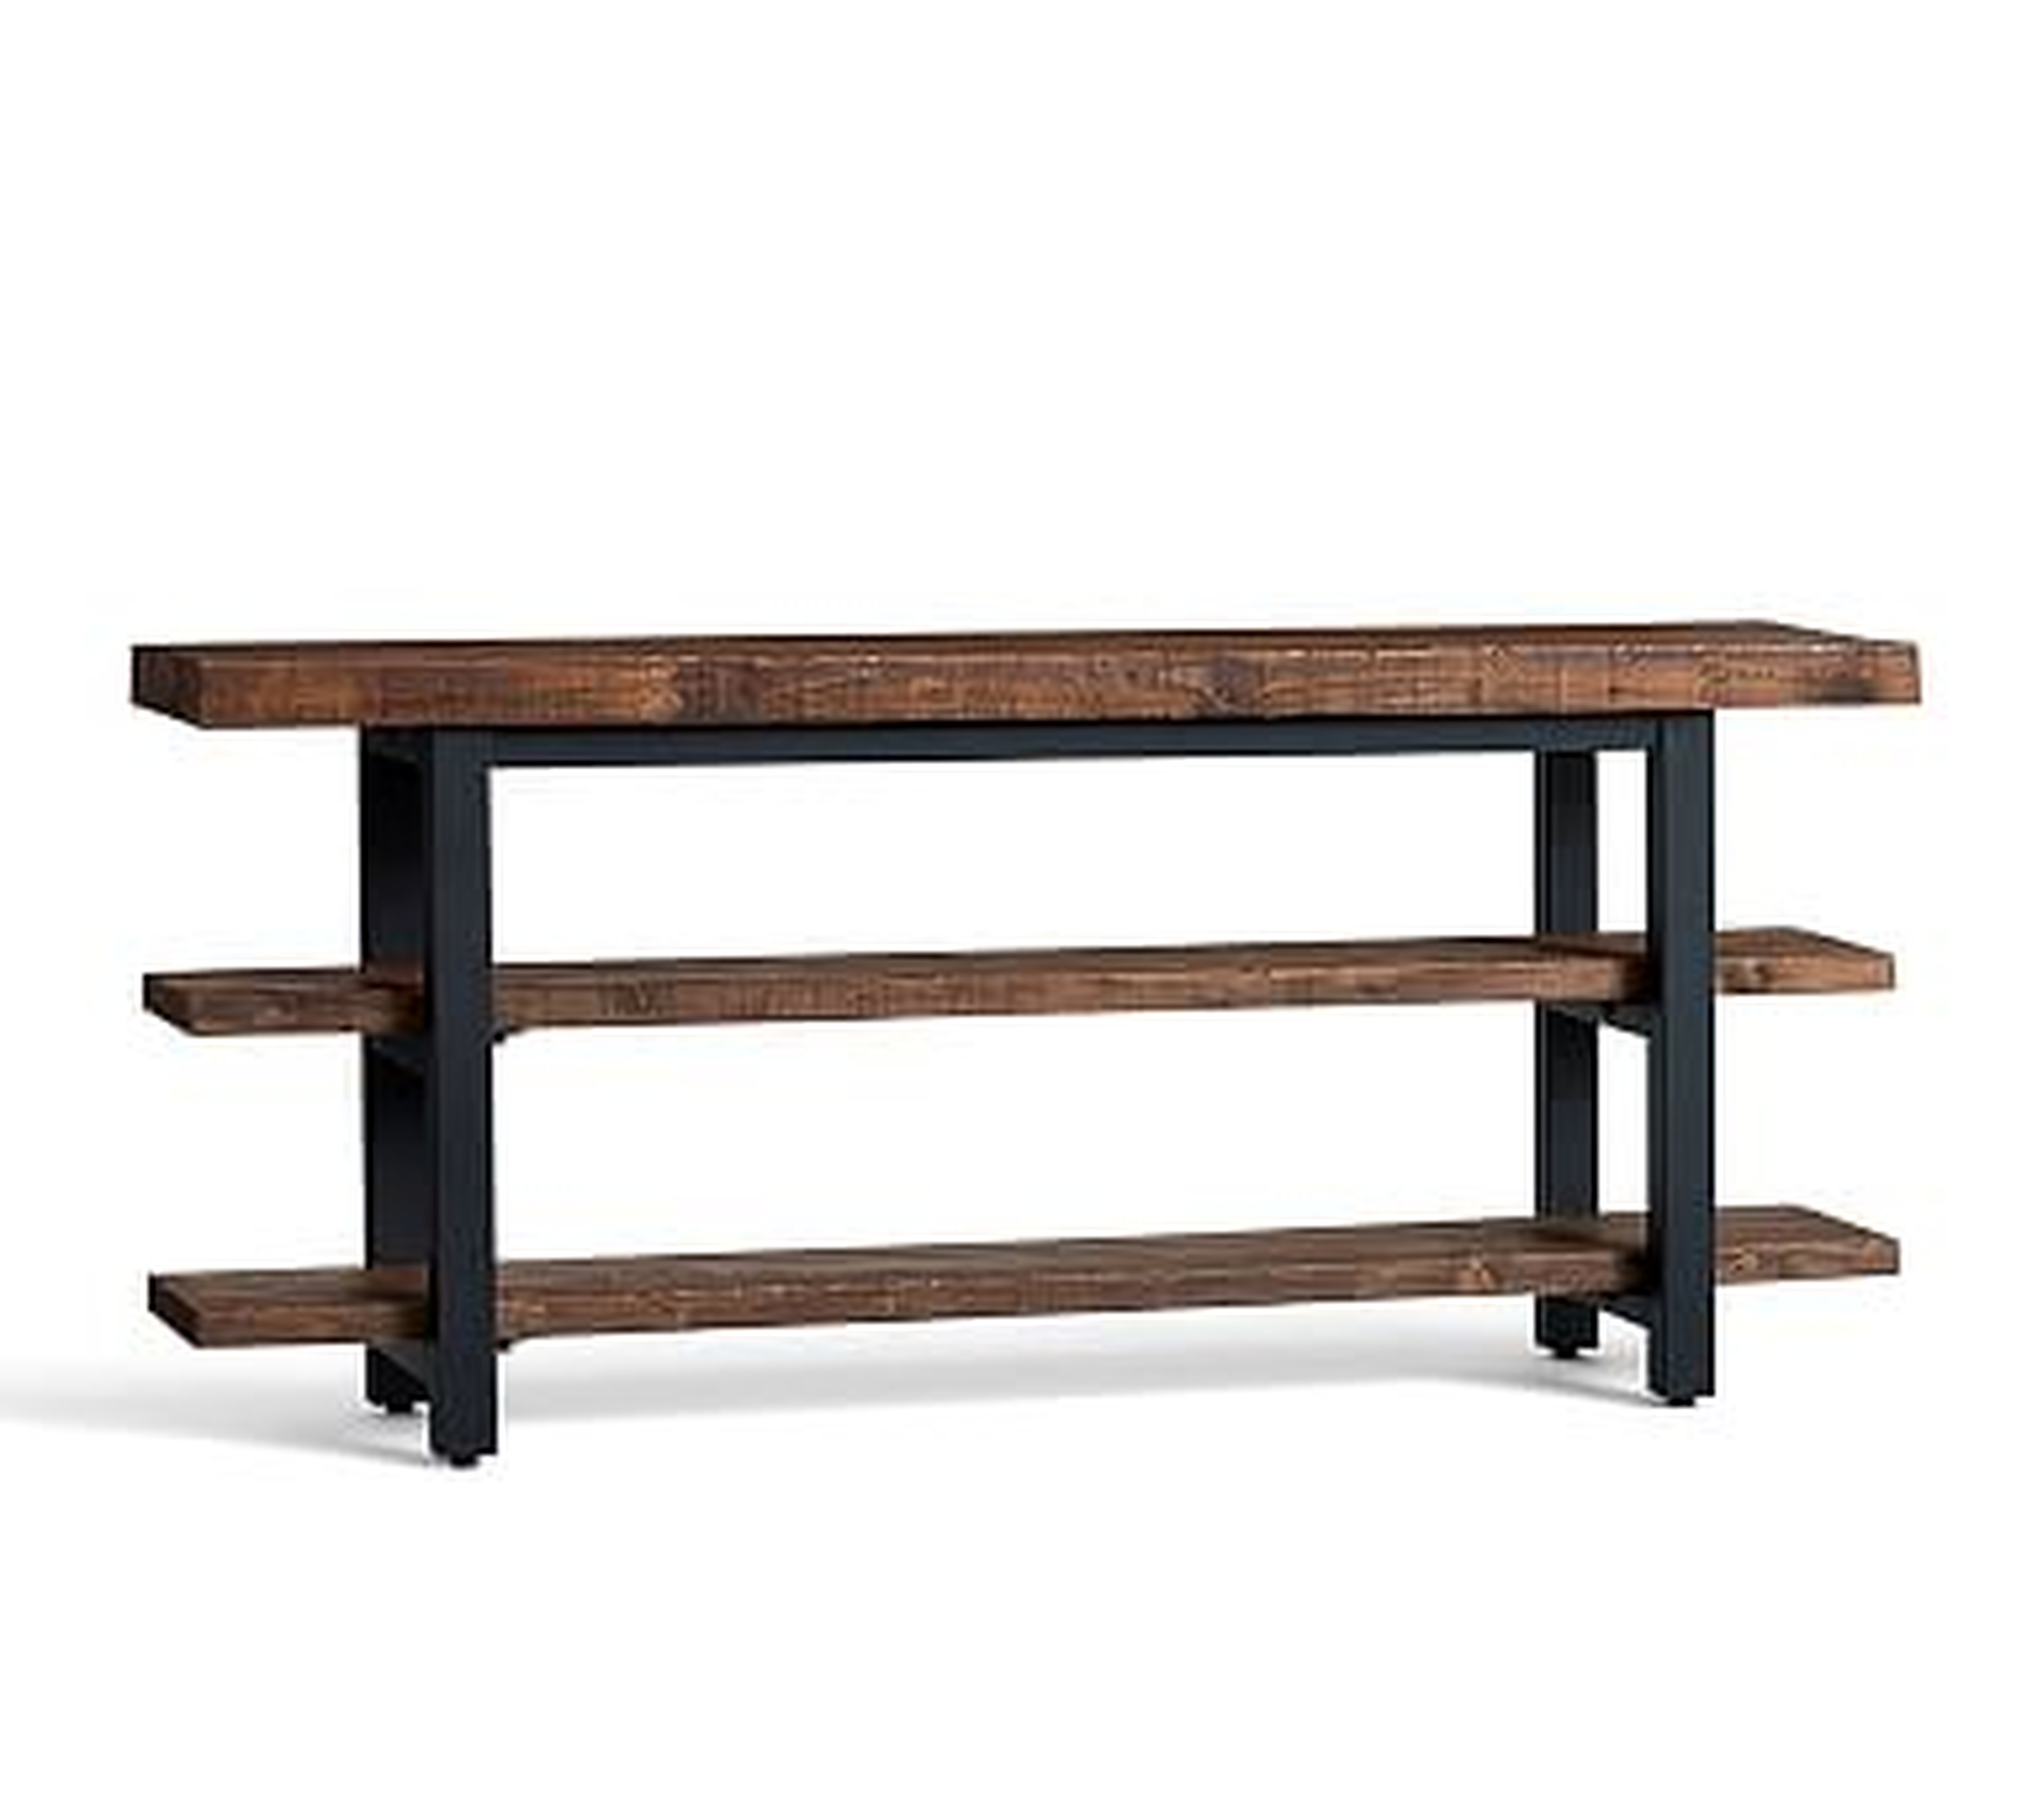 Griffin 70" Reclaimed Wood Media Console - Pottery Barn